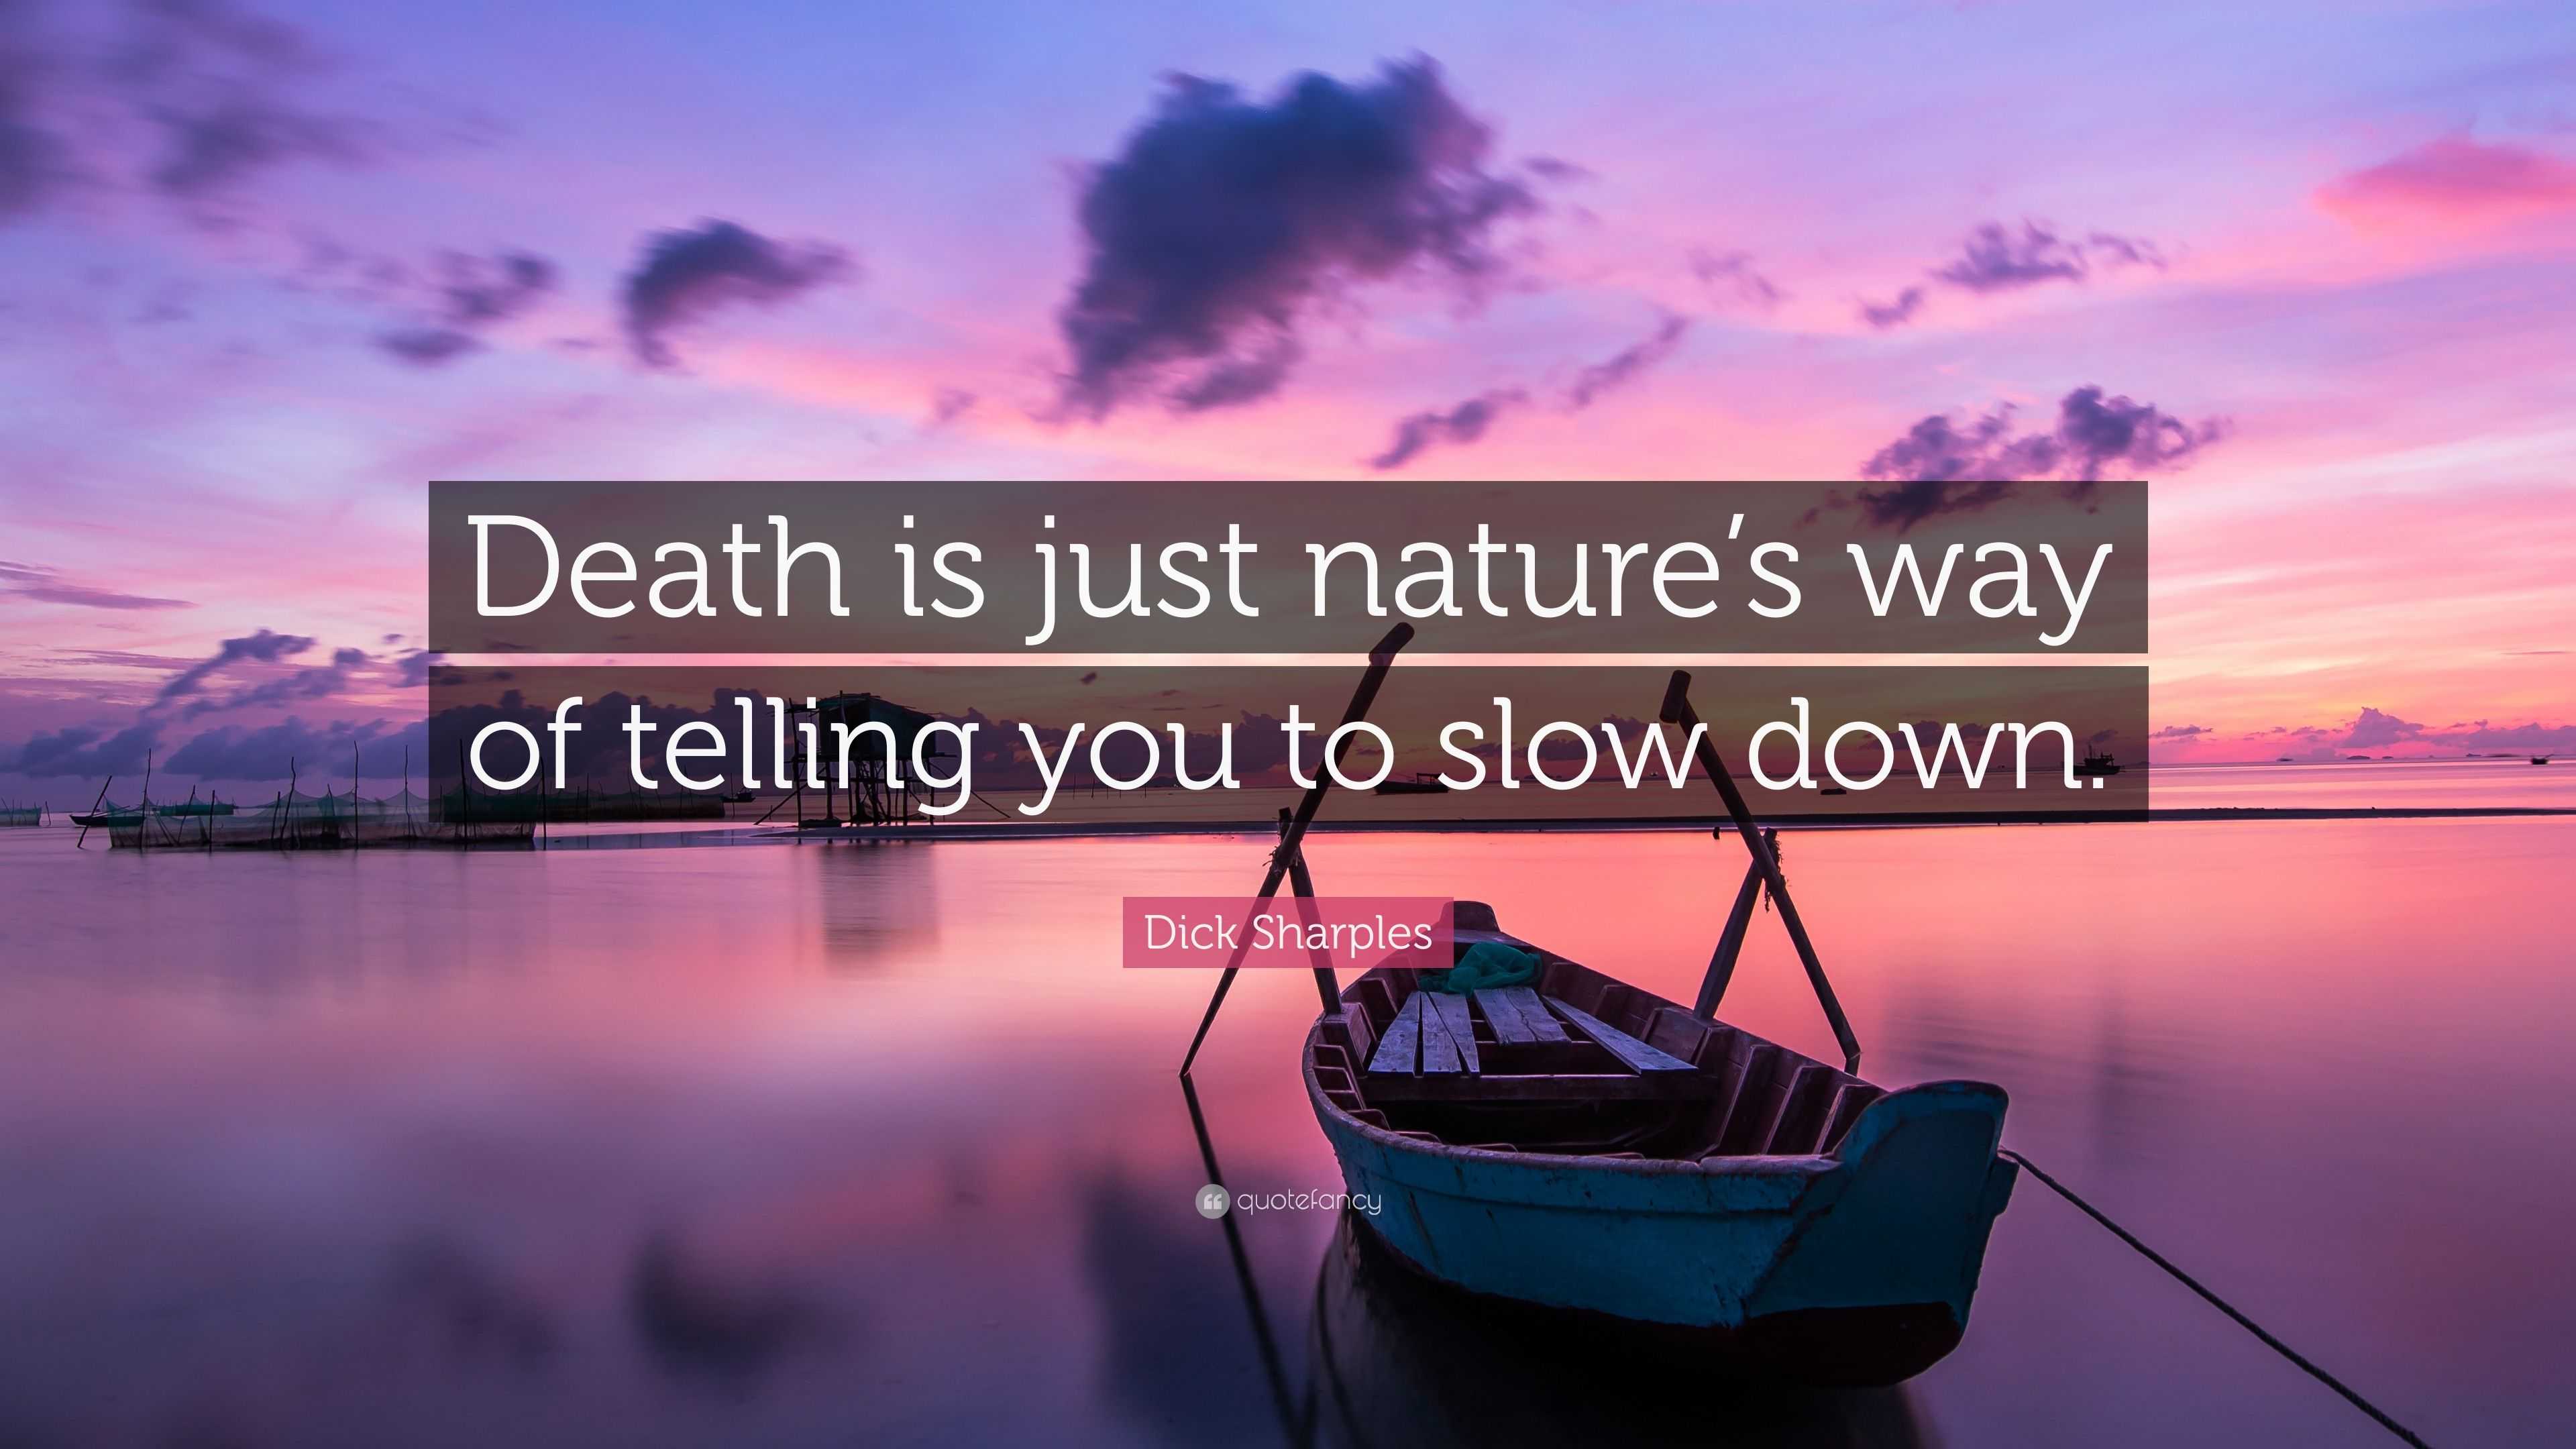 3283734-Dick-Sharples-Quote-Death-is-just-nature-s-way-of-telling-you-to.jpg